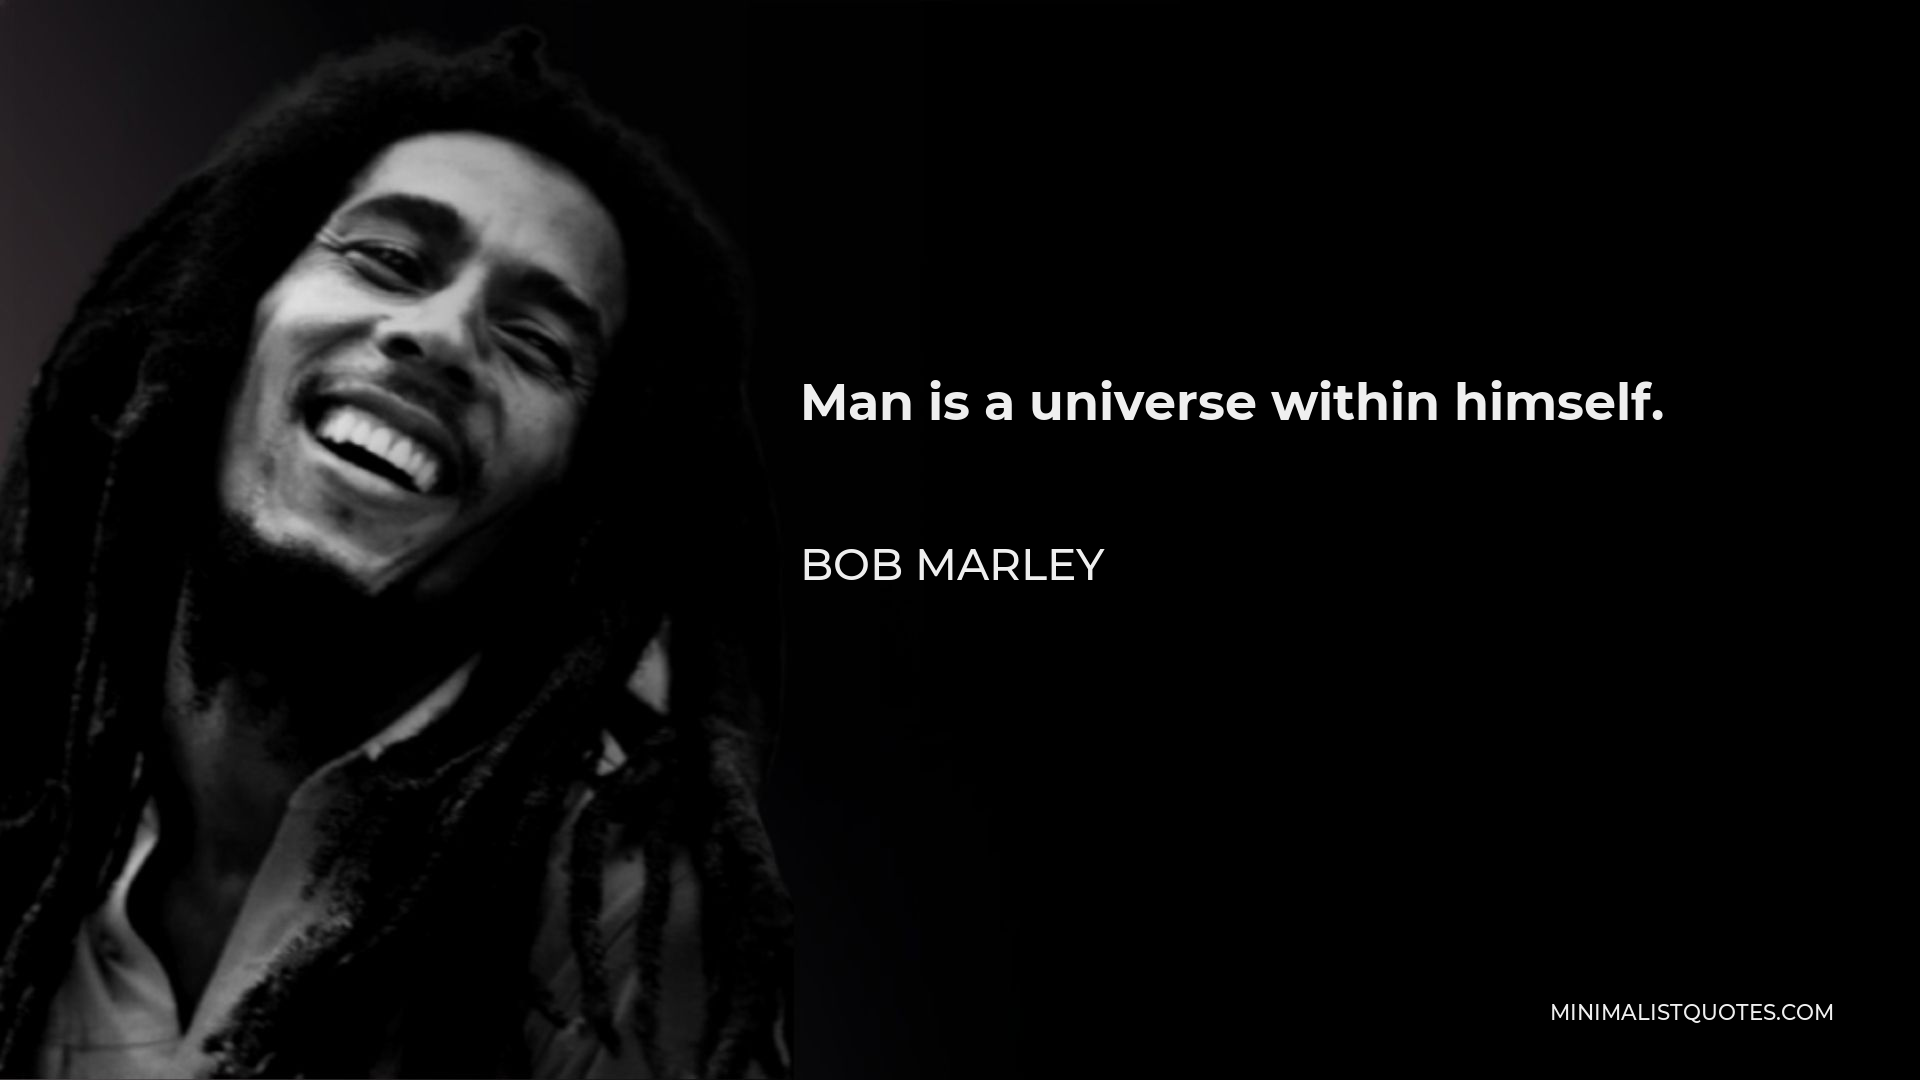 Bob Marley Quote - Man is a universe within himself.